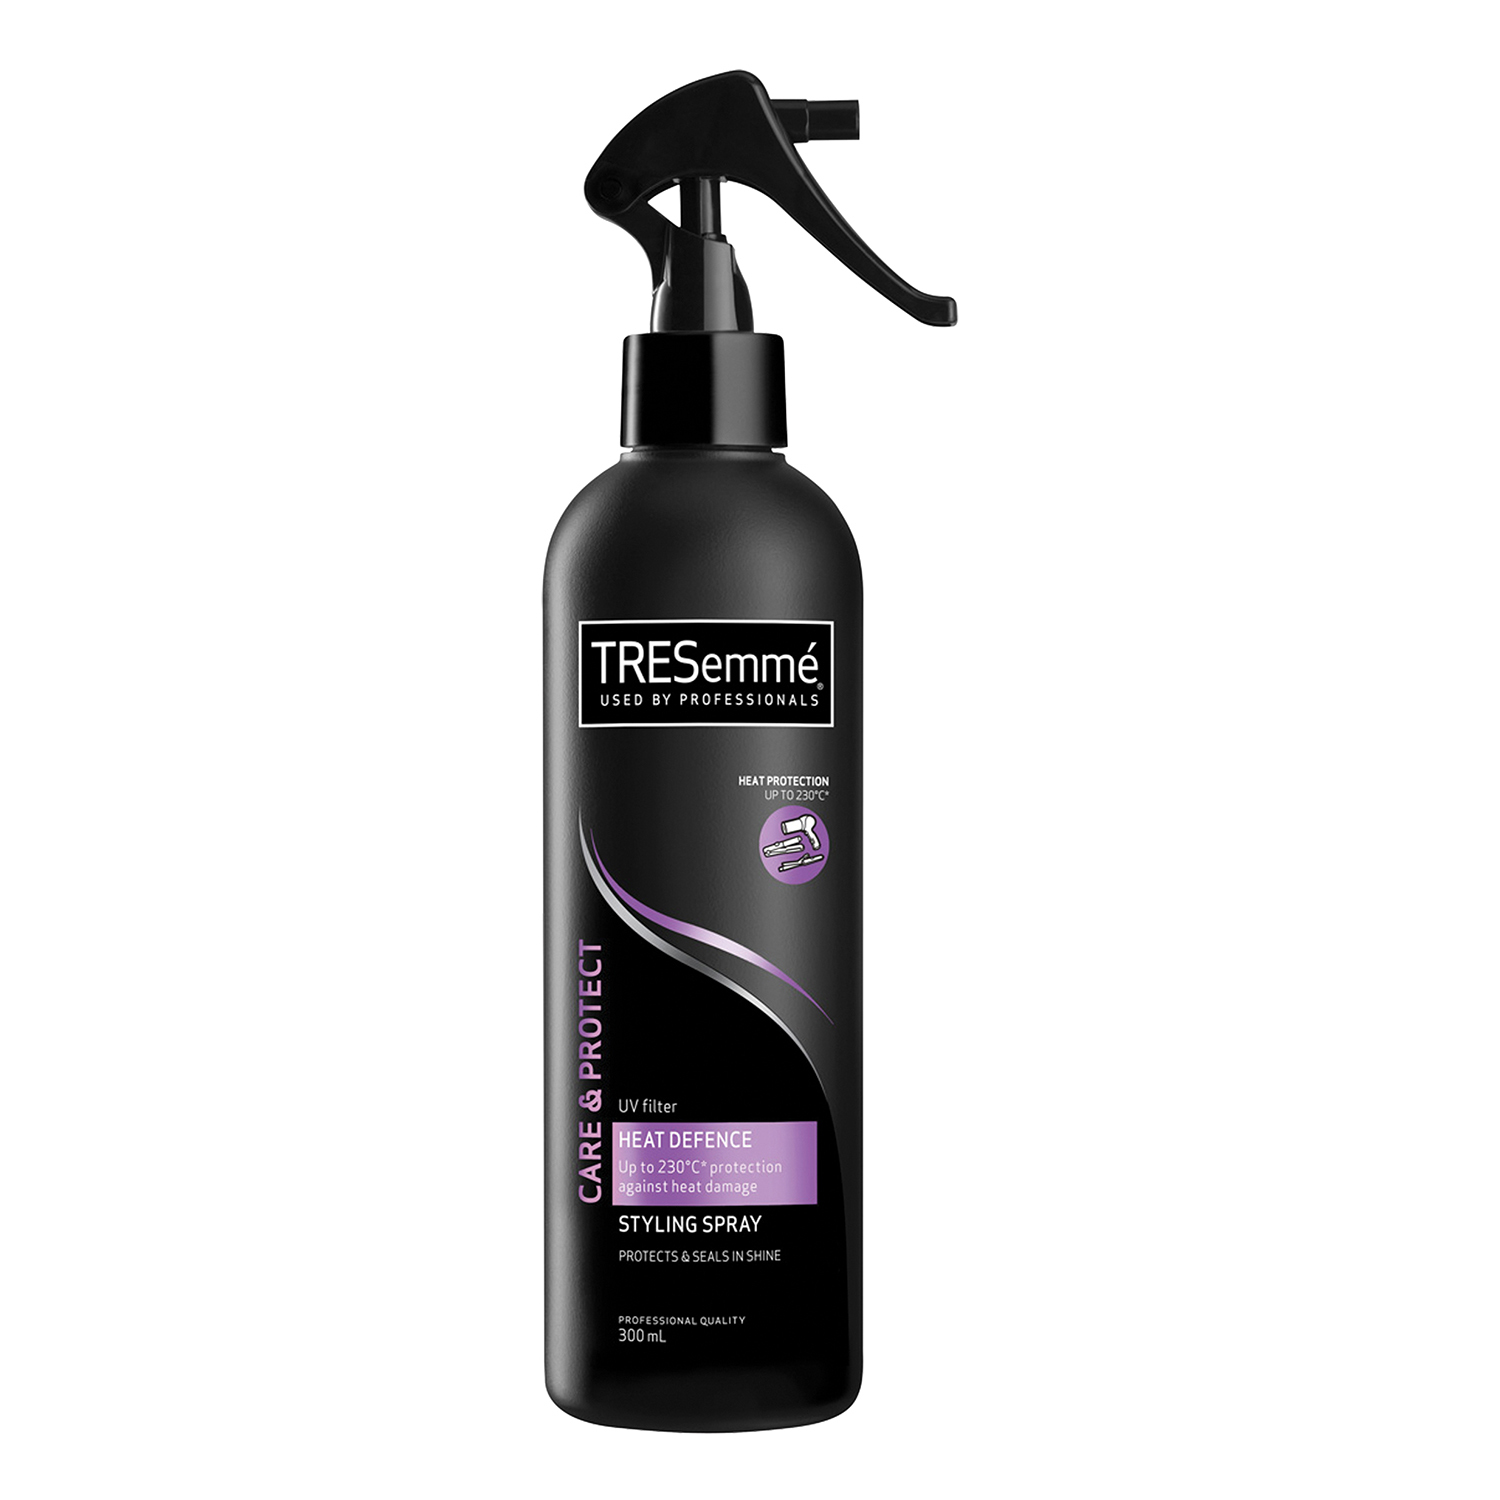 Tresemme Care and Protect Heat Defence Styling Spray 300ml Image